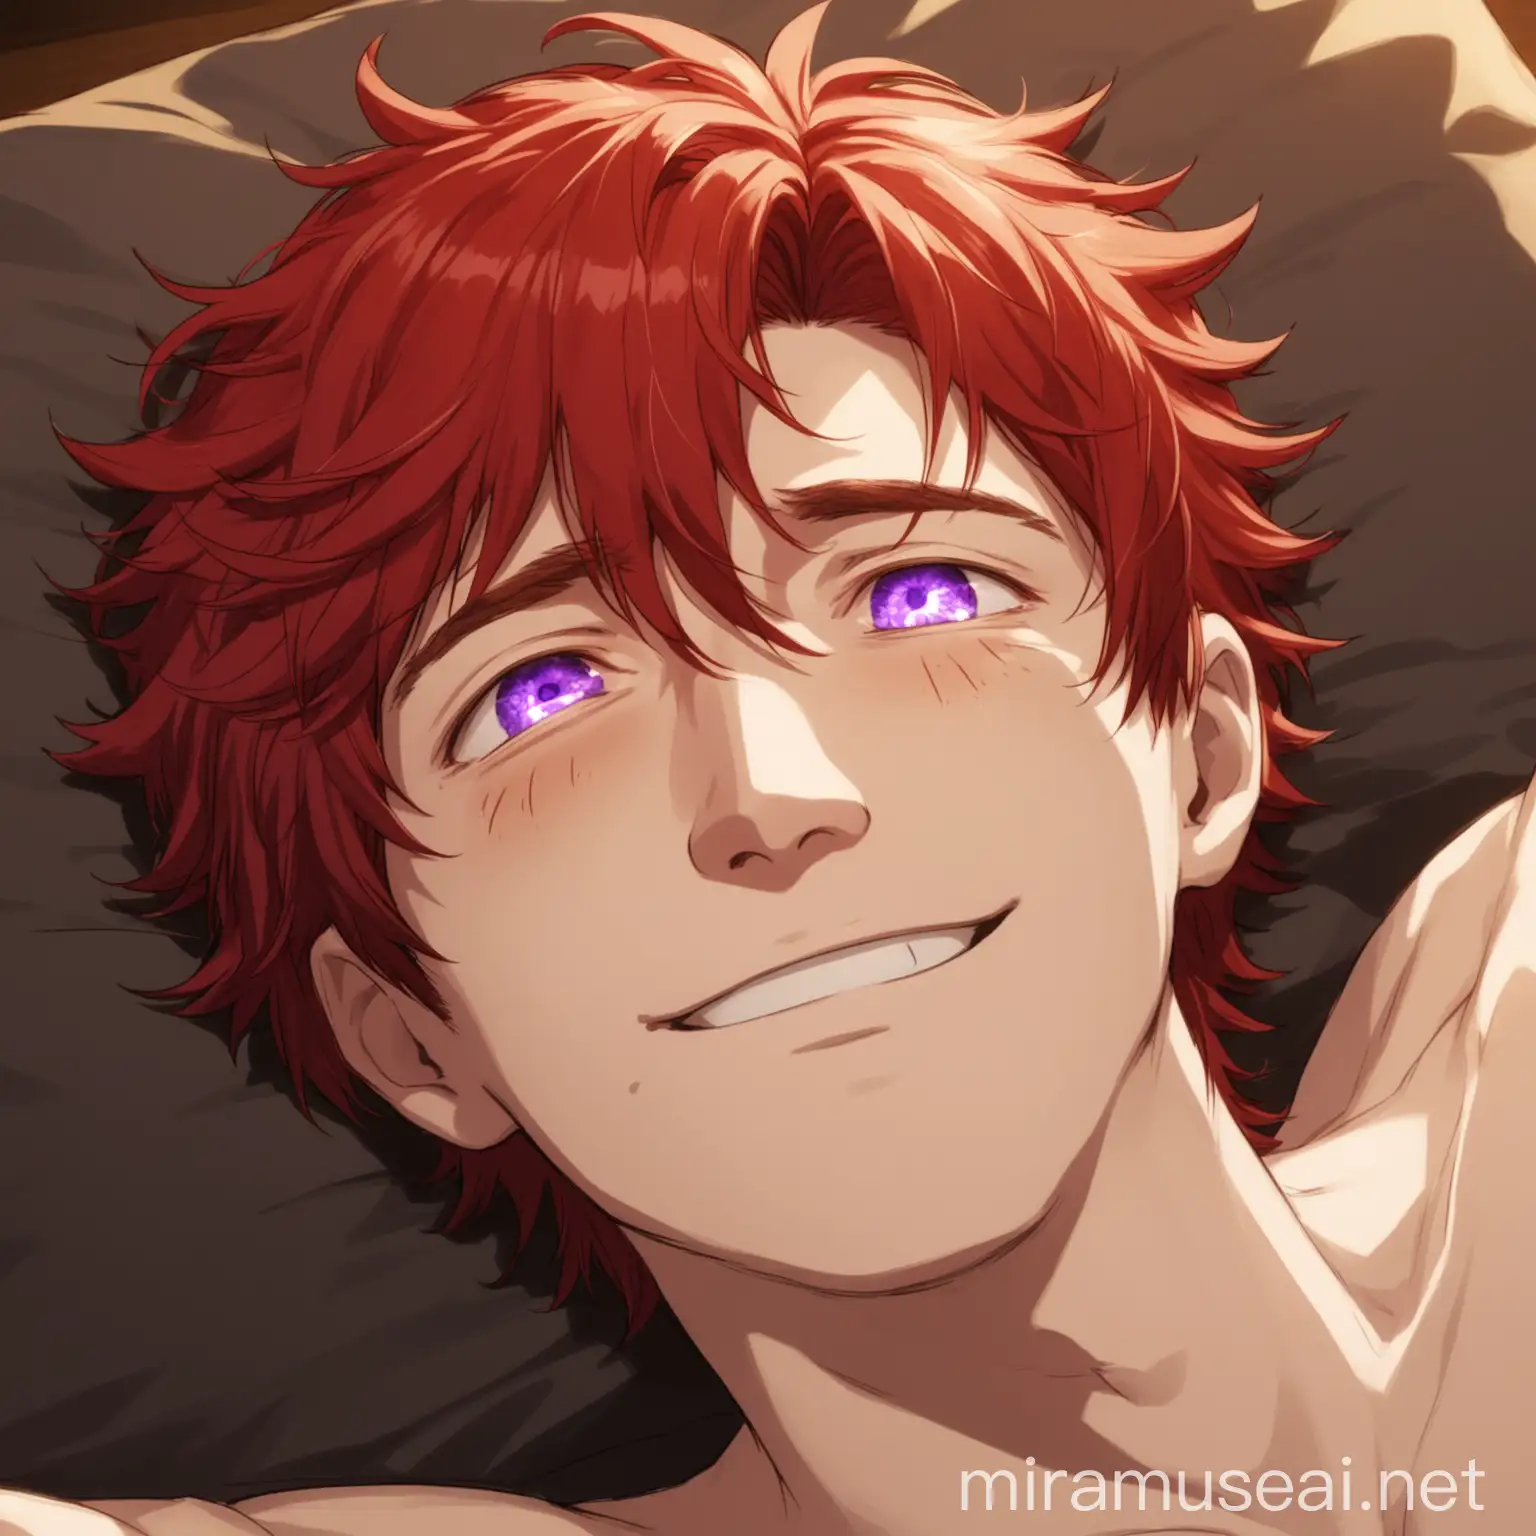 Drunk RedHaired Man with Purple Eyes Smiling and Lying Down